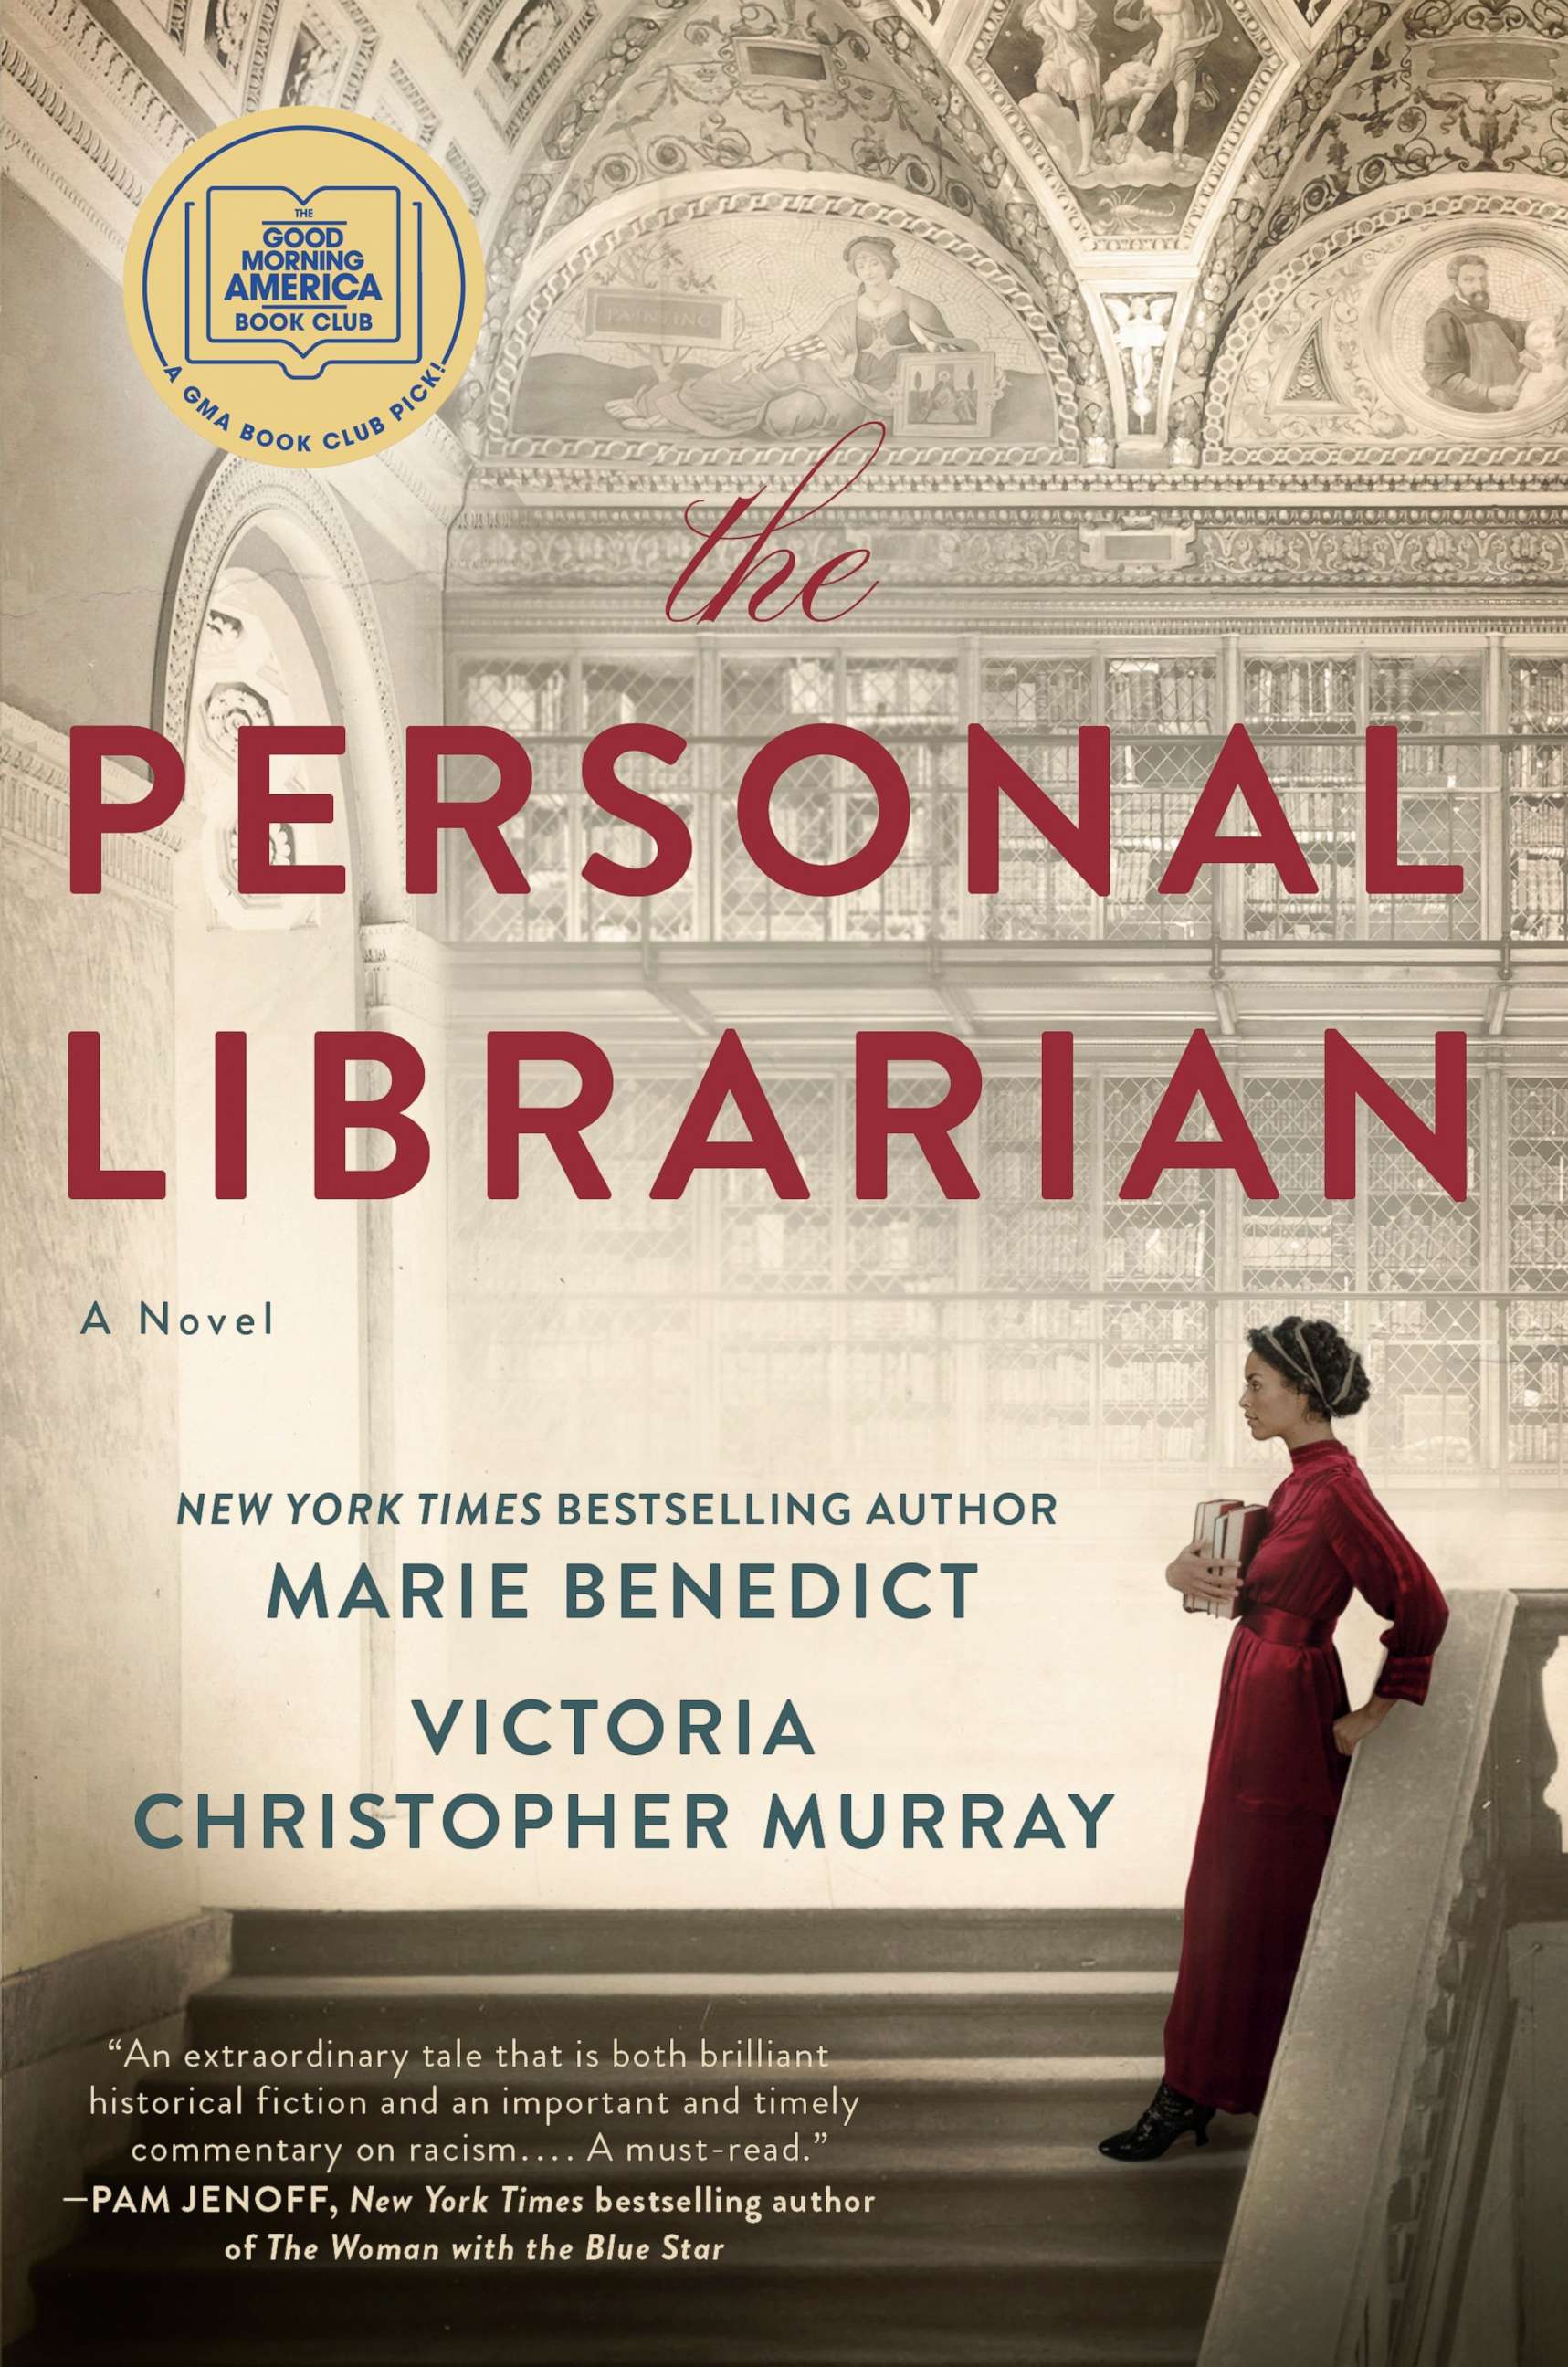 'The Personal Librarian' by Marie Benedict and Victoria Christopher Murray